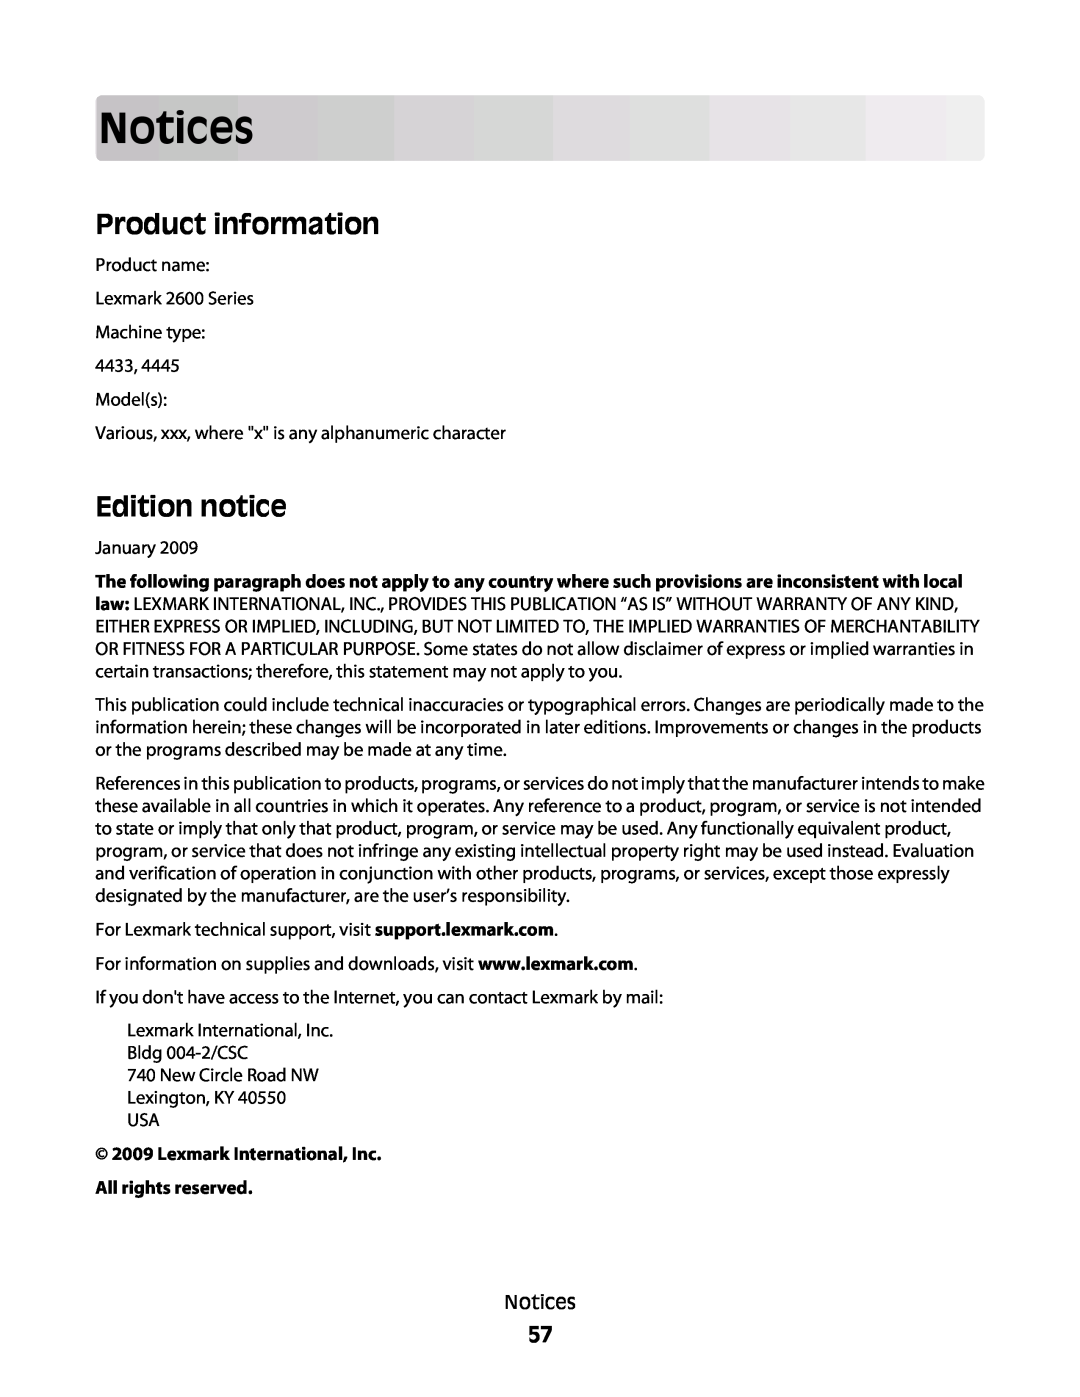 Lexmark 4445, 4433 manual Notices, Product information, Edition notice, Lexmark International, Inc. All rights reserved 